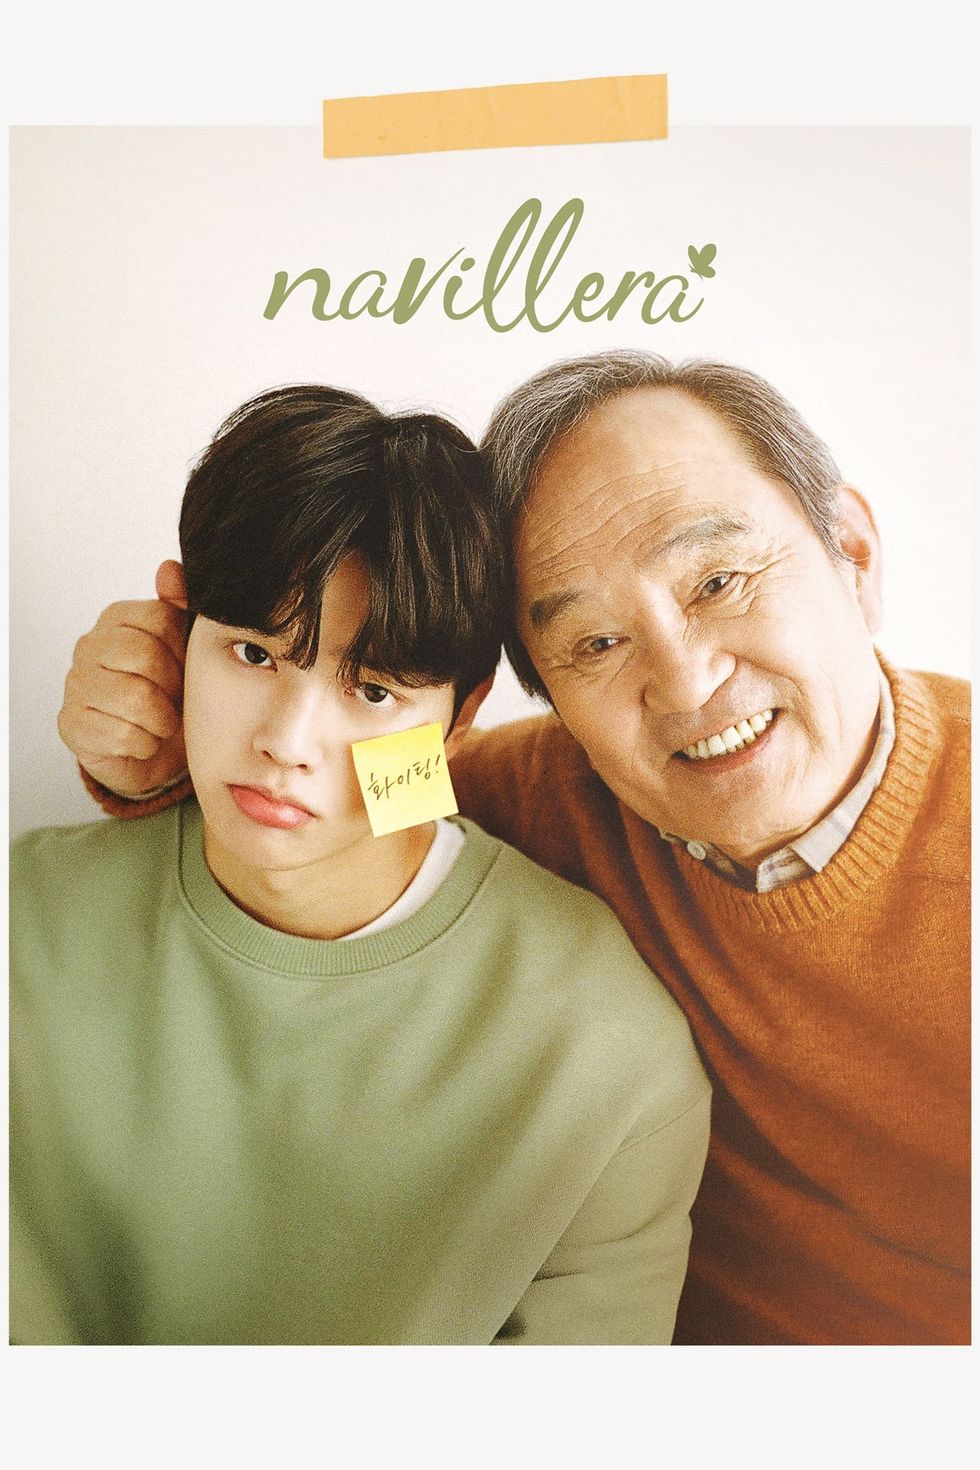 navillera, aka nabillera, poster in english, from left song kang, park in hwan, season 1, premiered in the us on march 22, 2021 photo ©tvnnetflix  courtesy everett collection